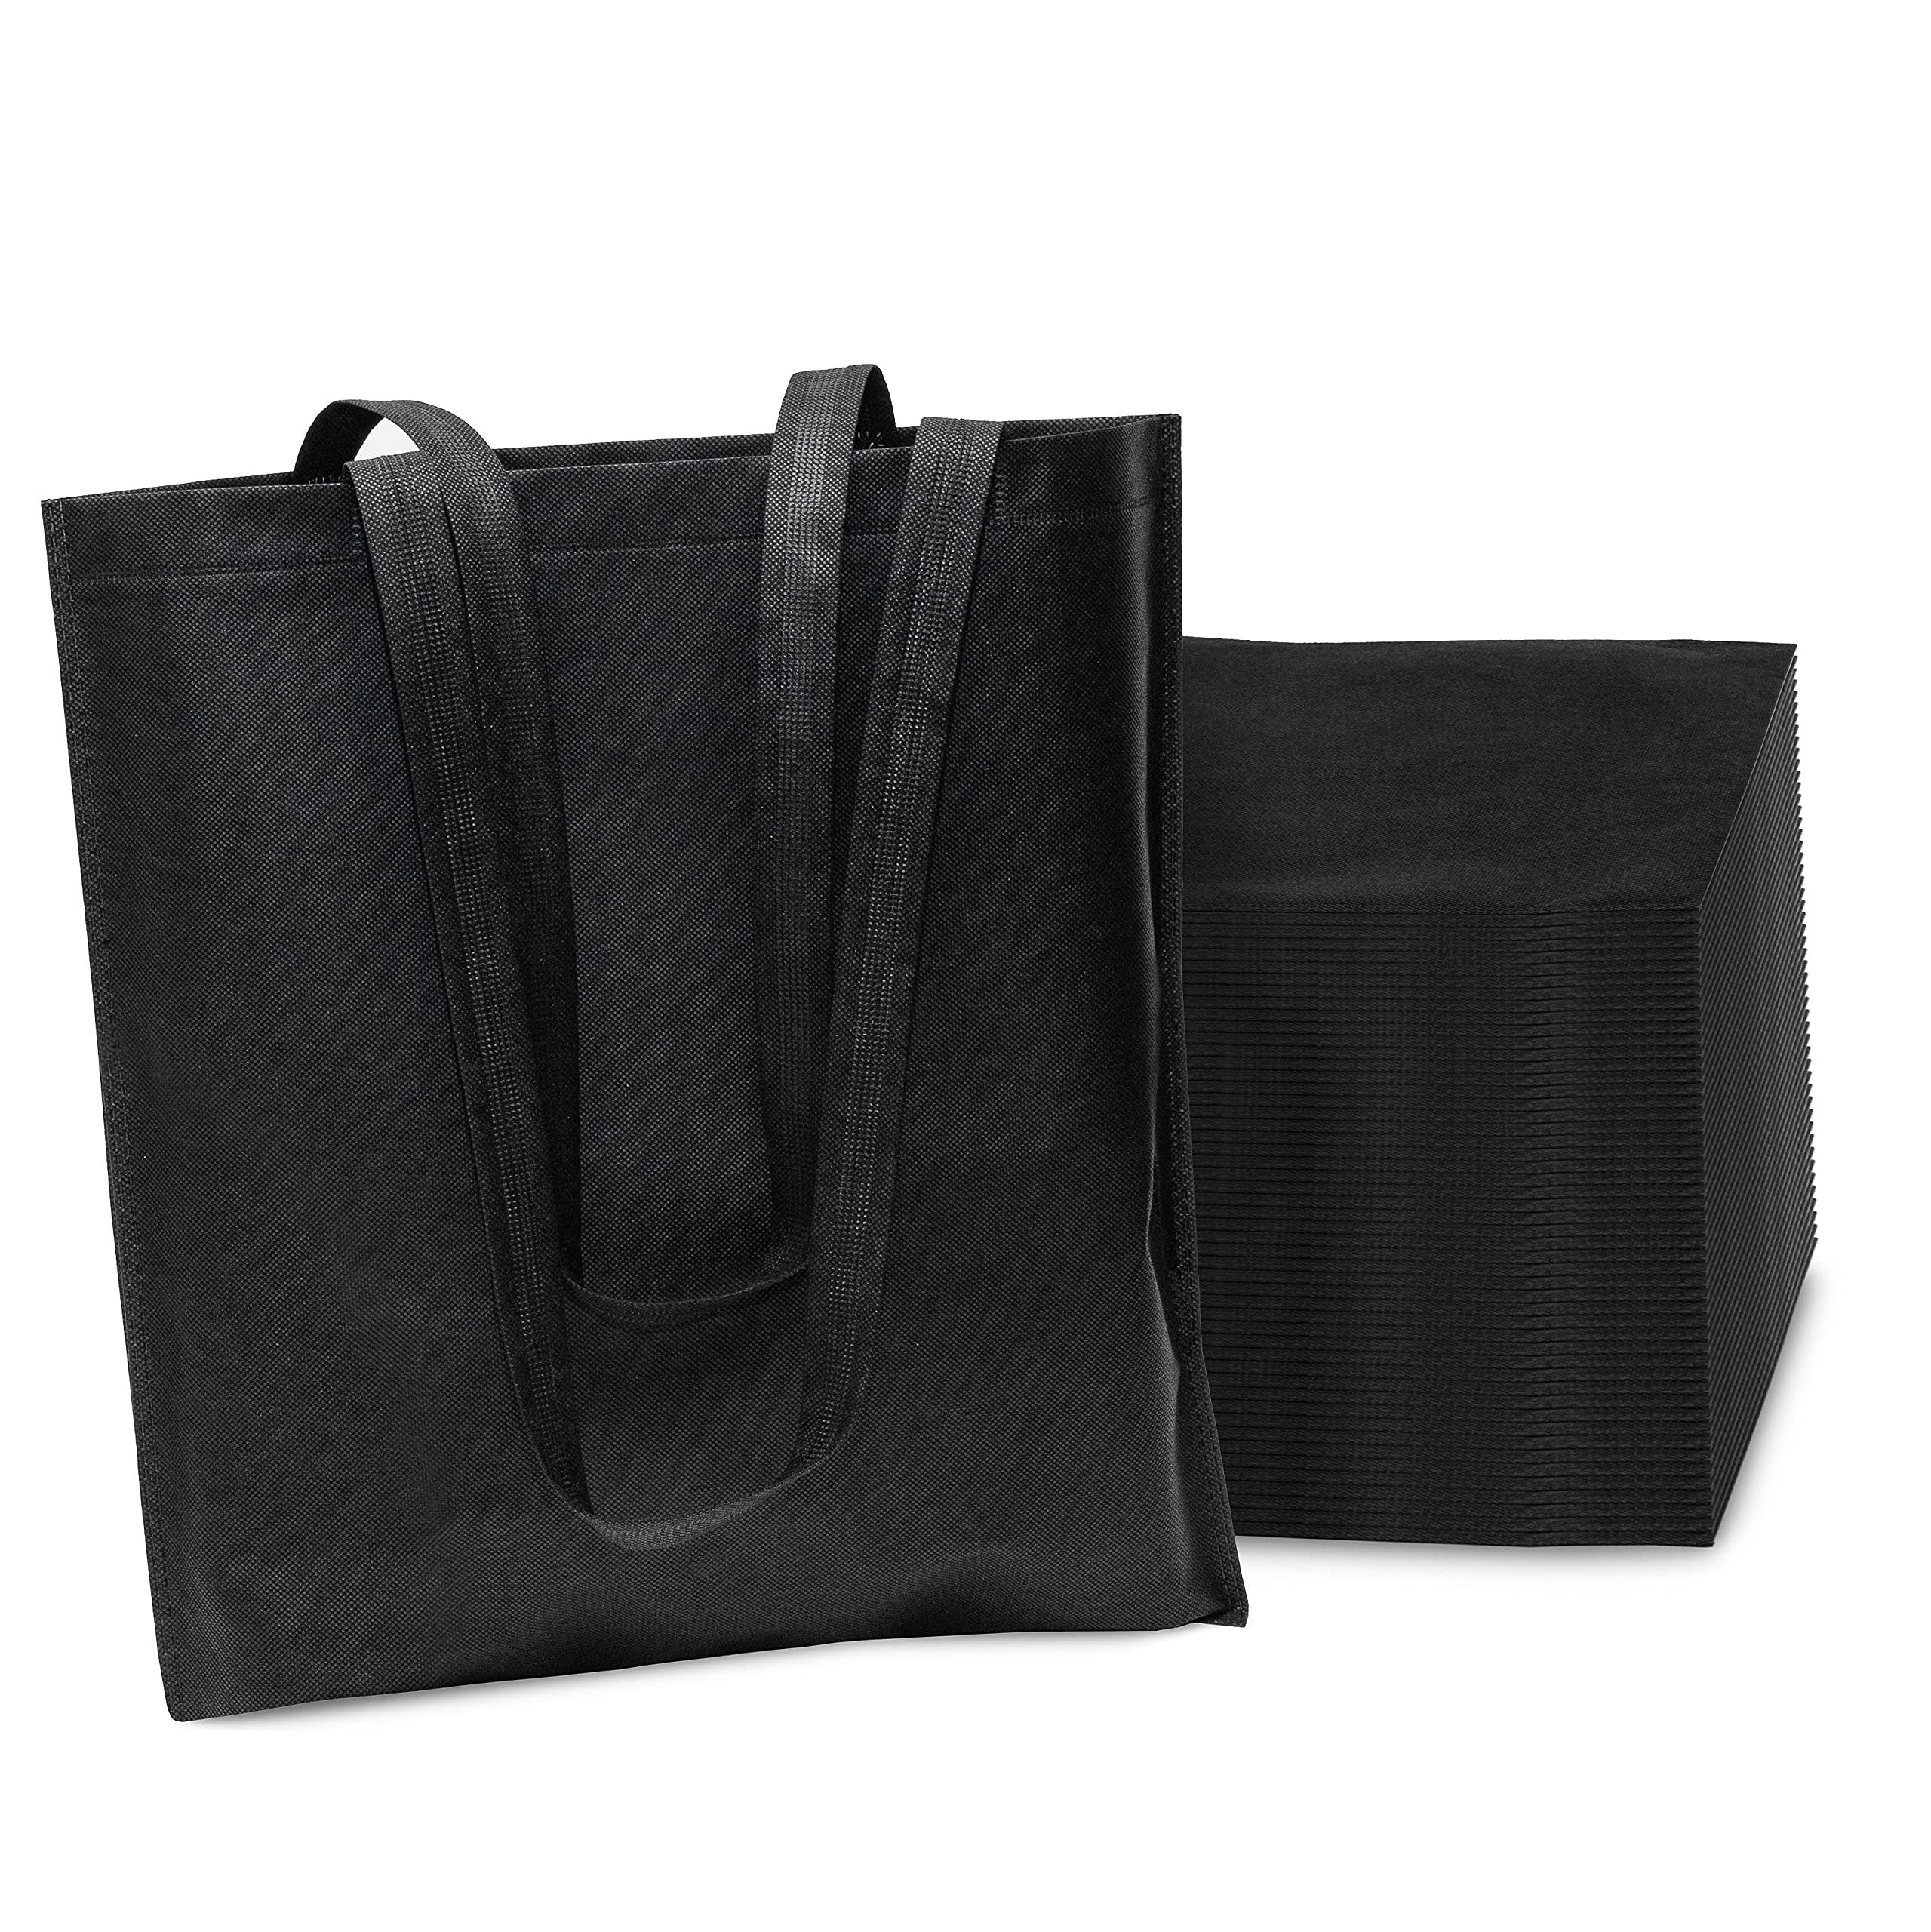 25-Pack Black Fabric Thank You Totes w/ Handles - Reusable Shopping Bags 15x16